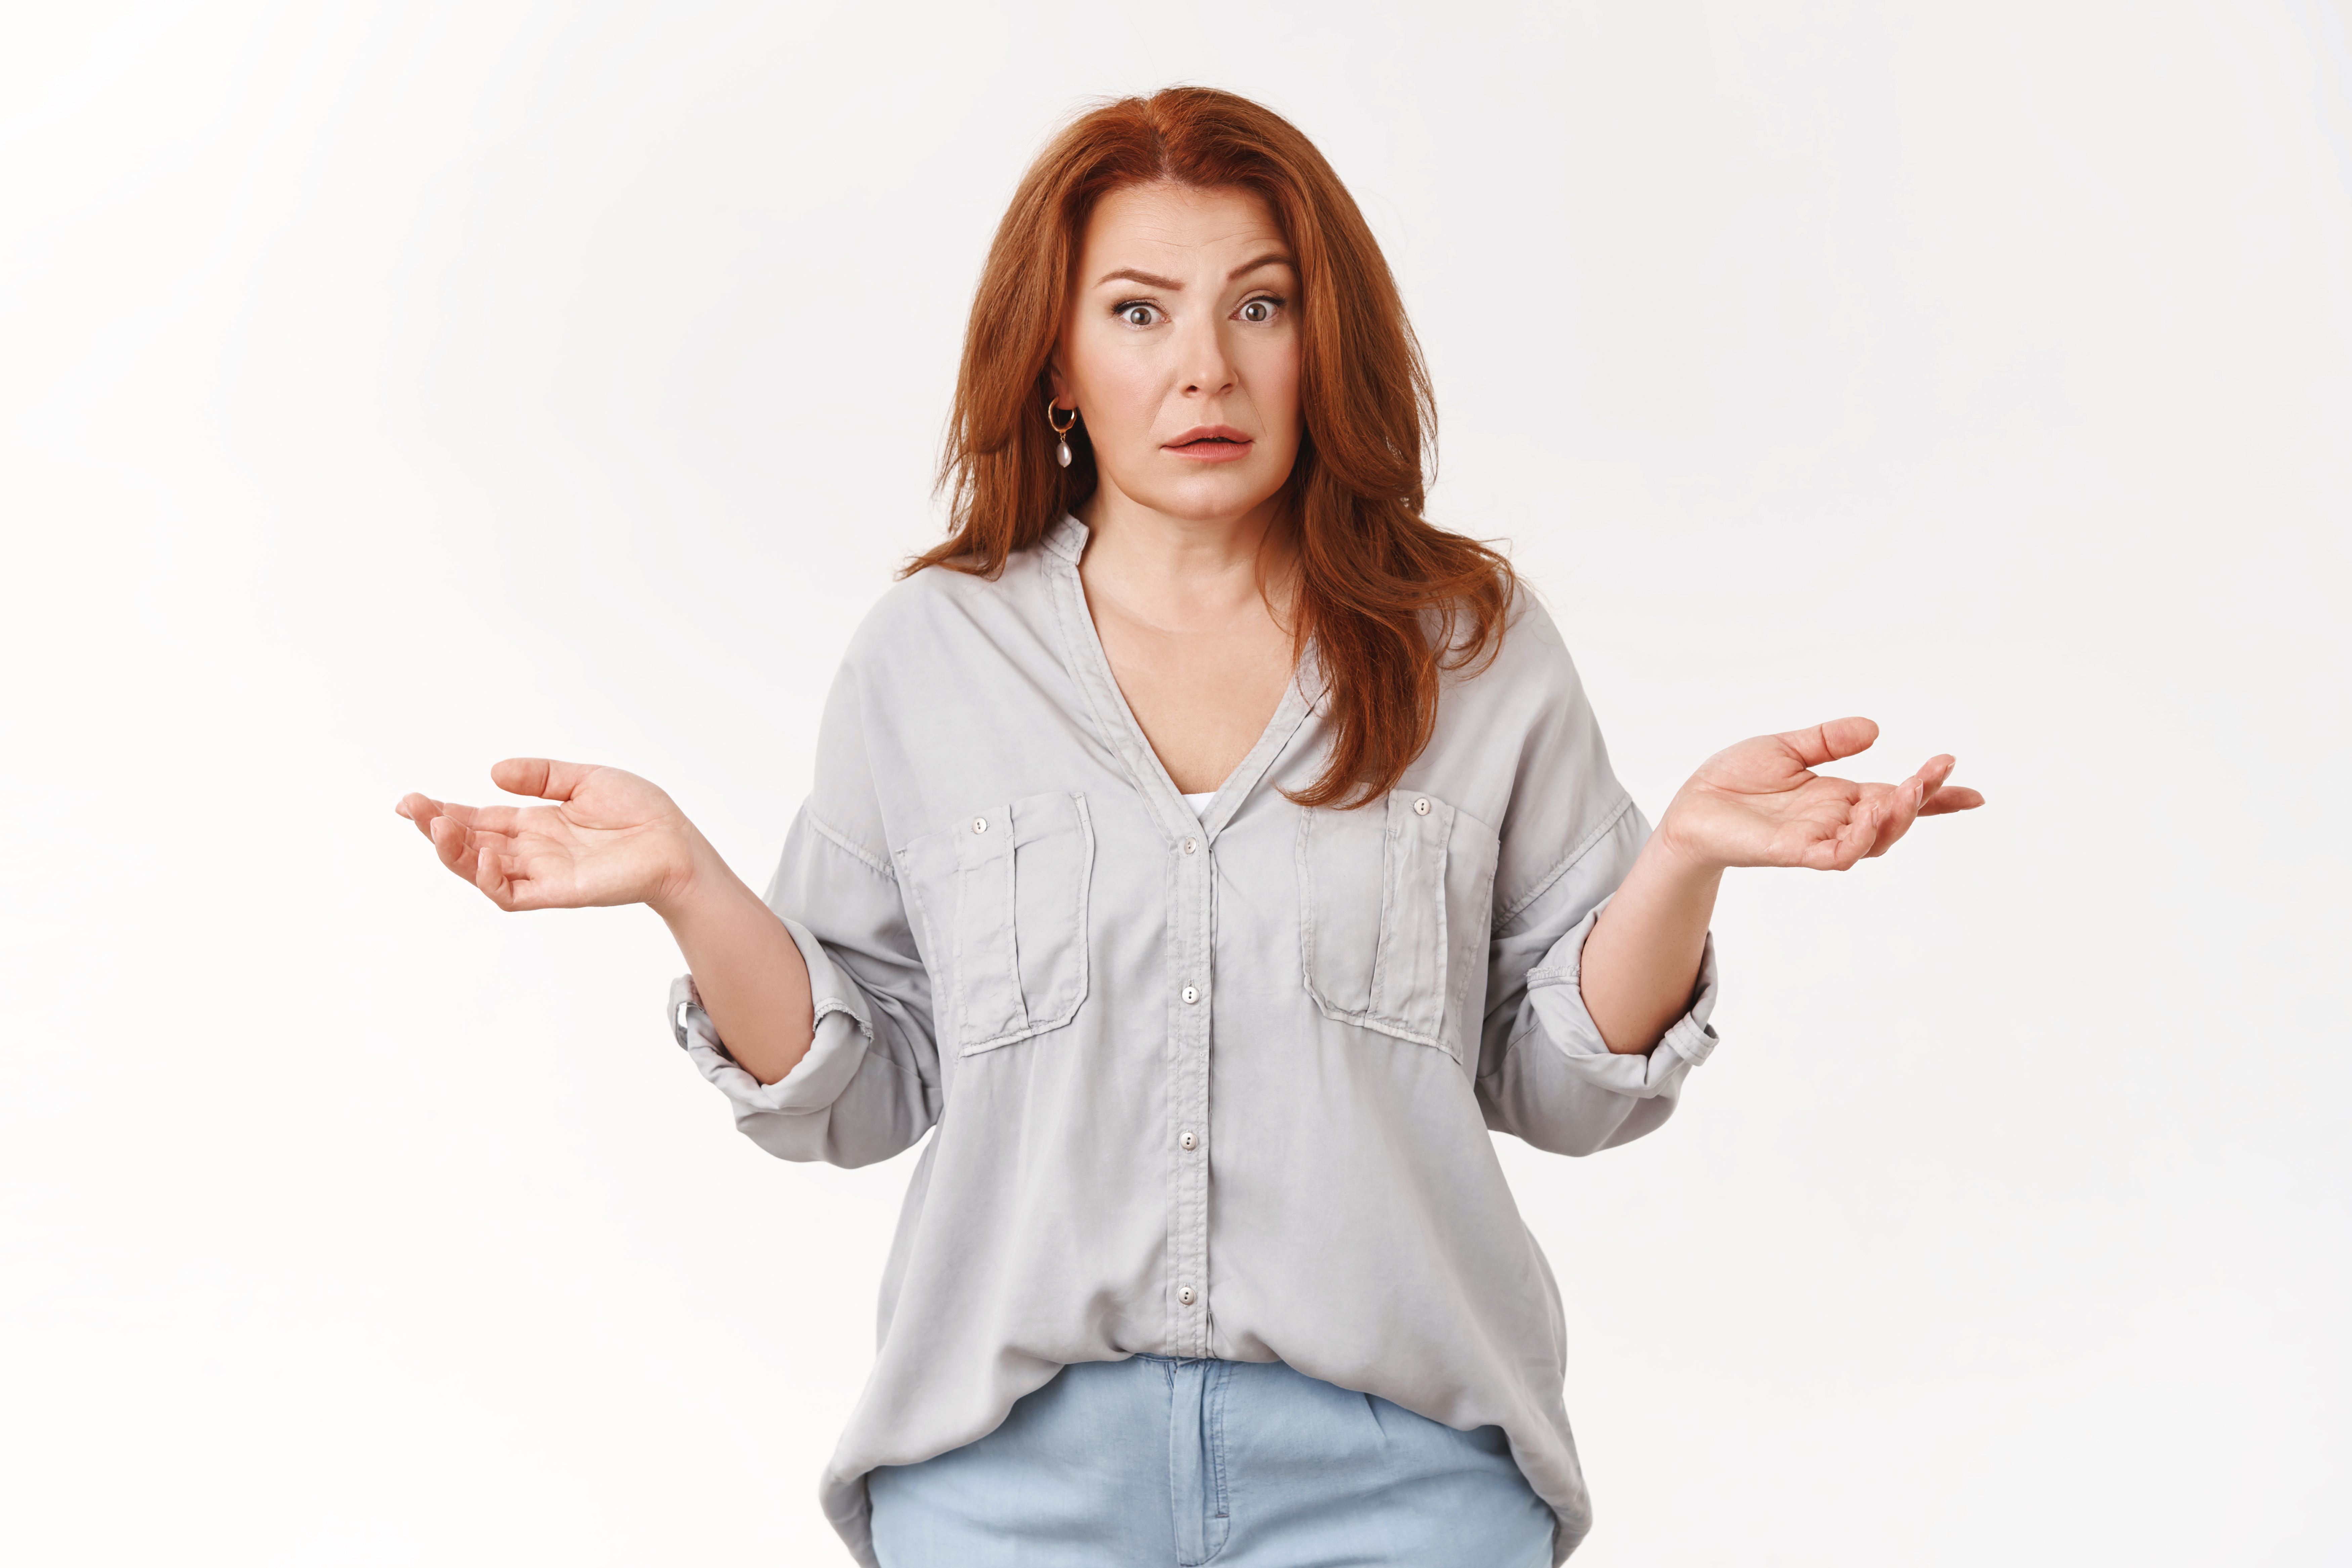 A confused woman | Source: Shutterstock